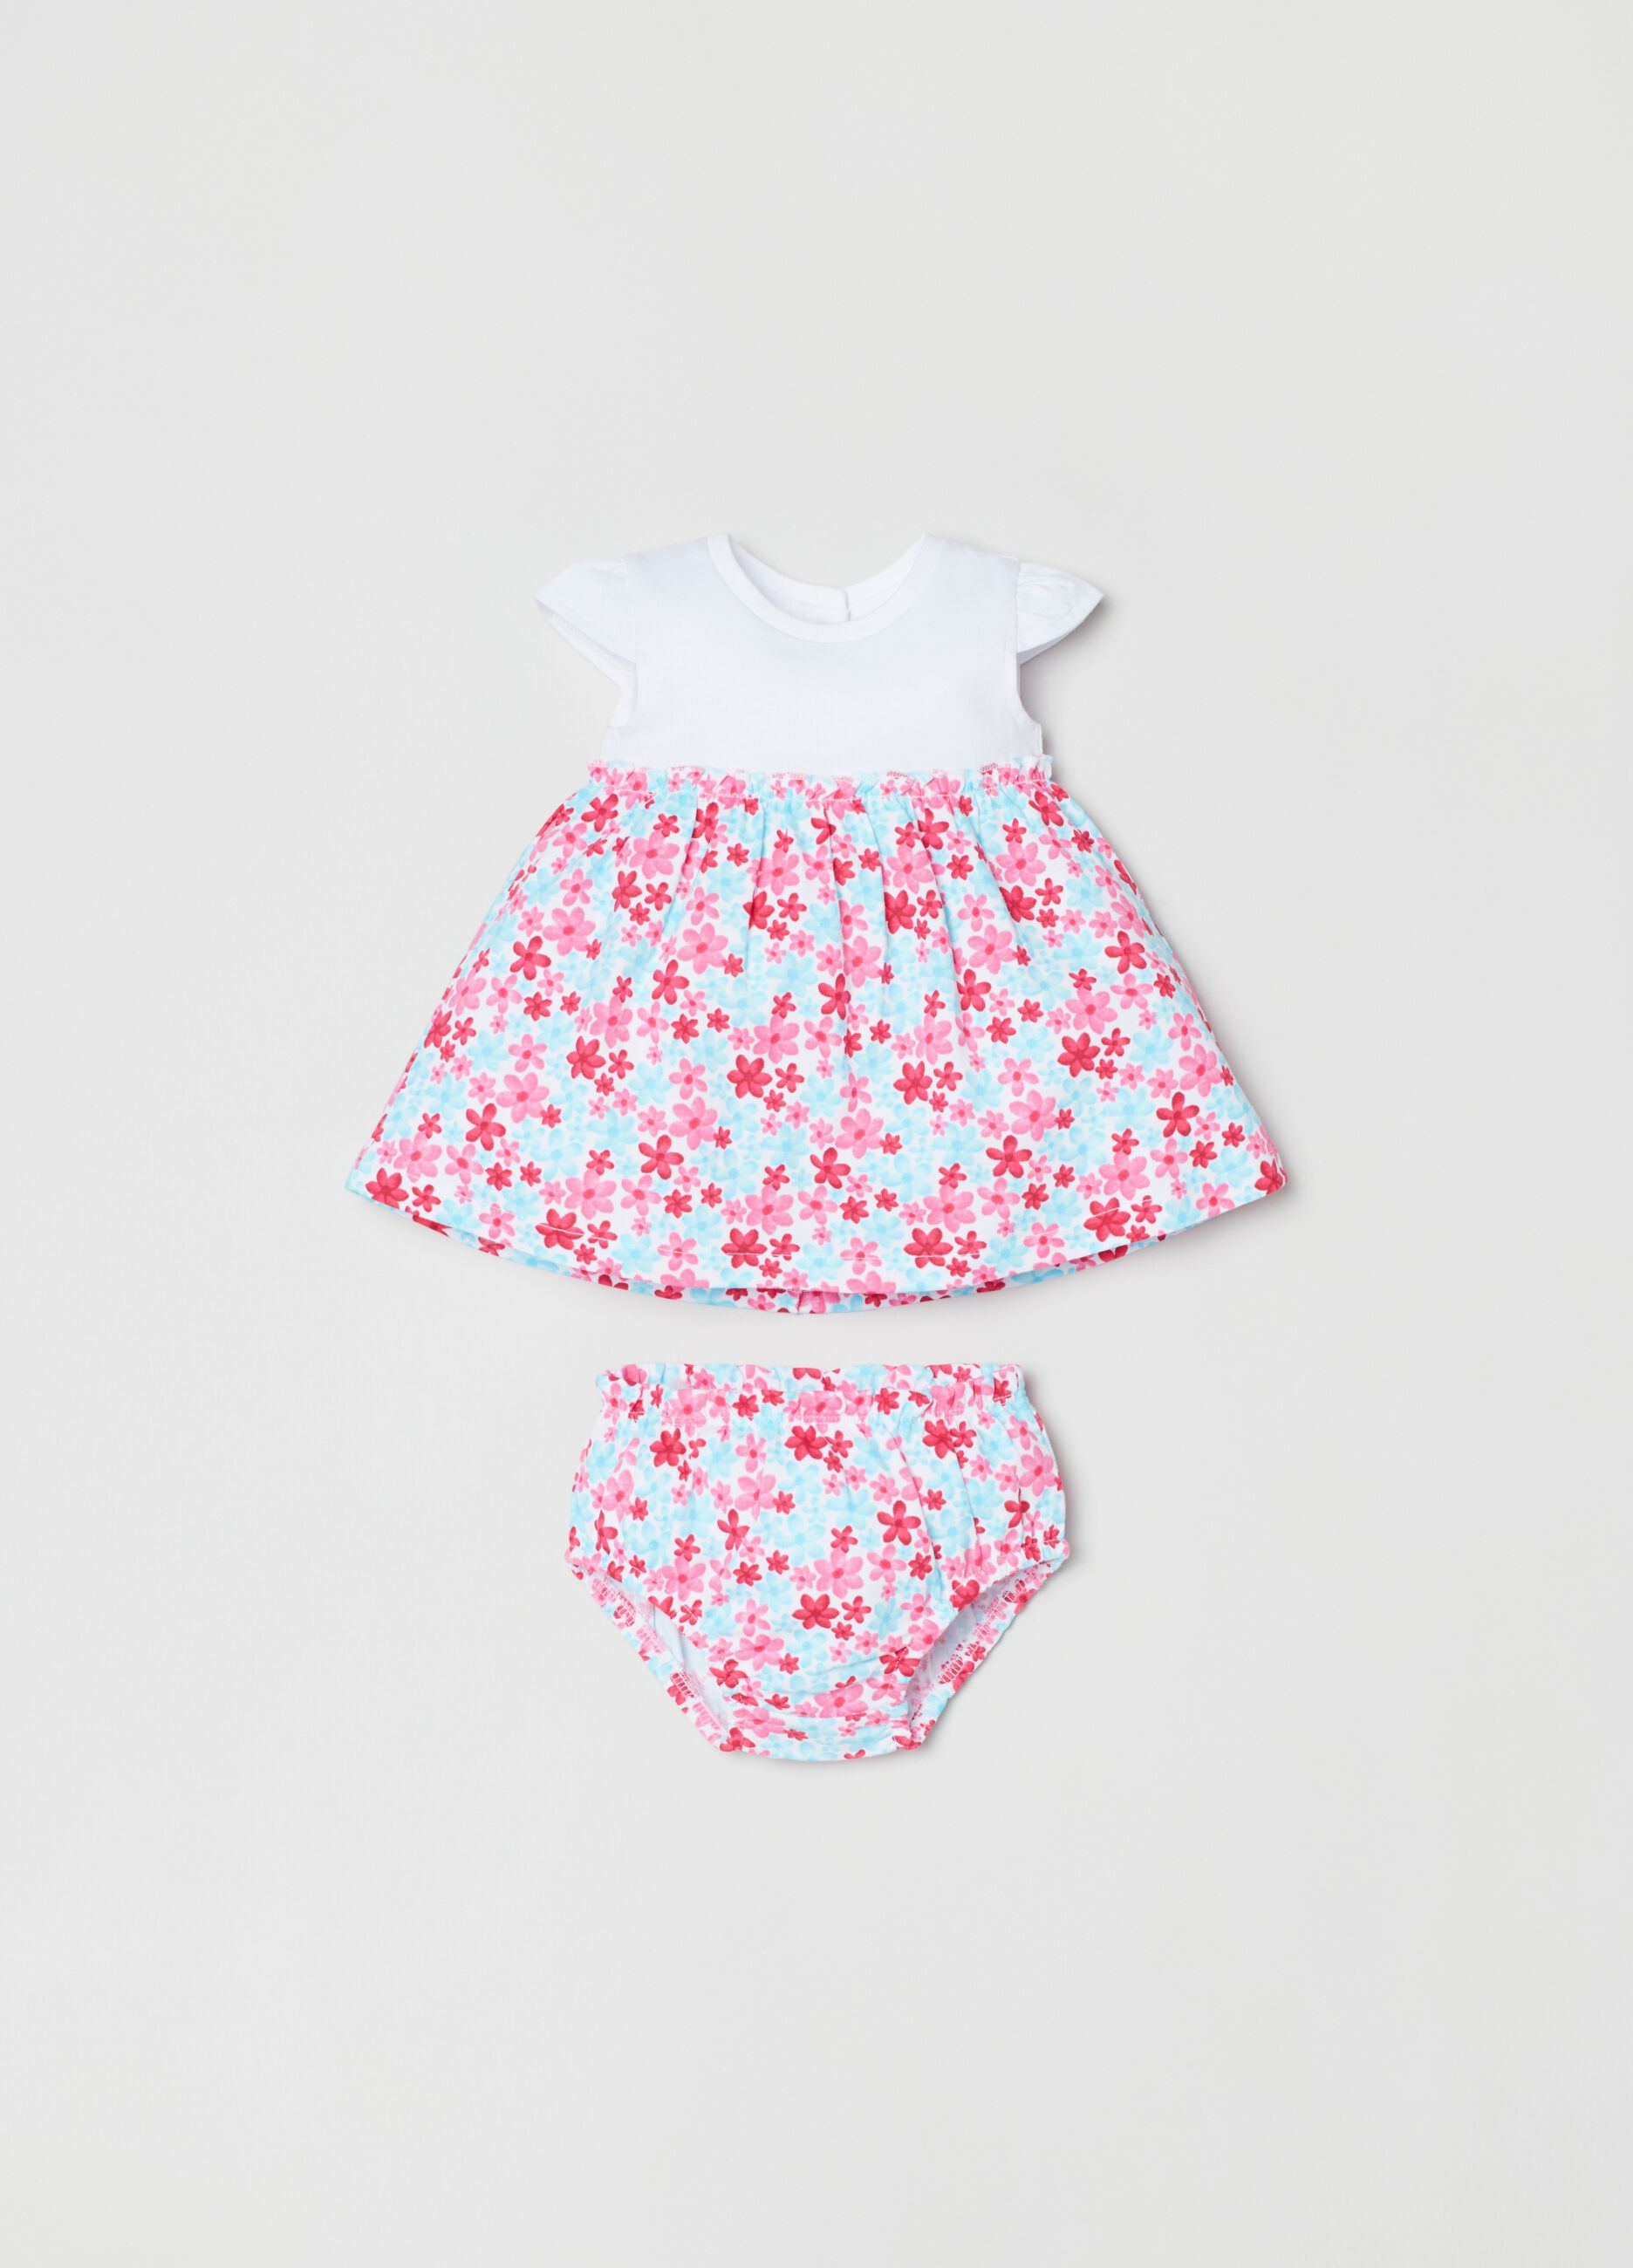 Dress and culottes set with small flowers print